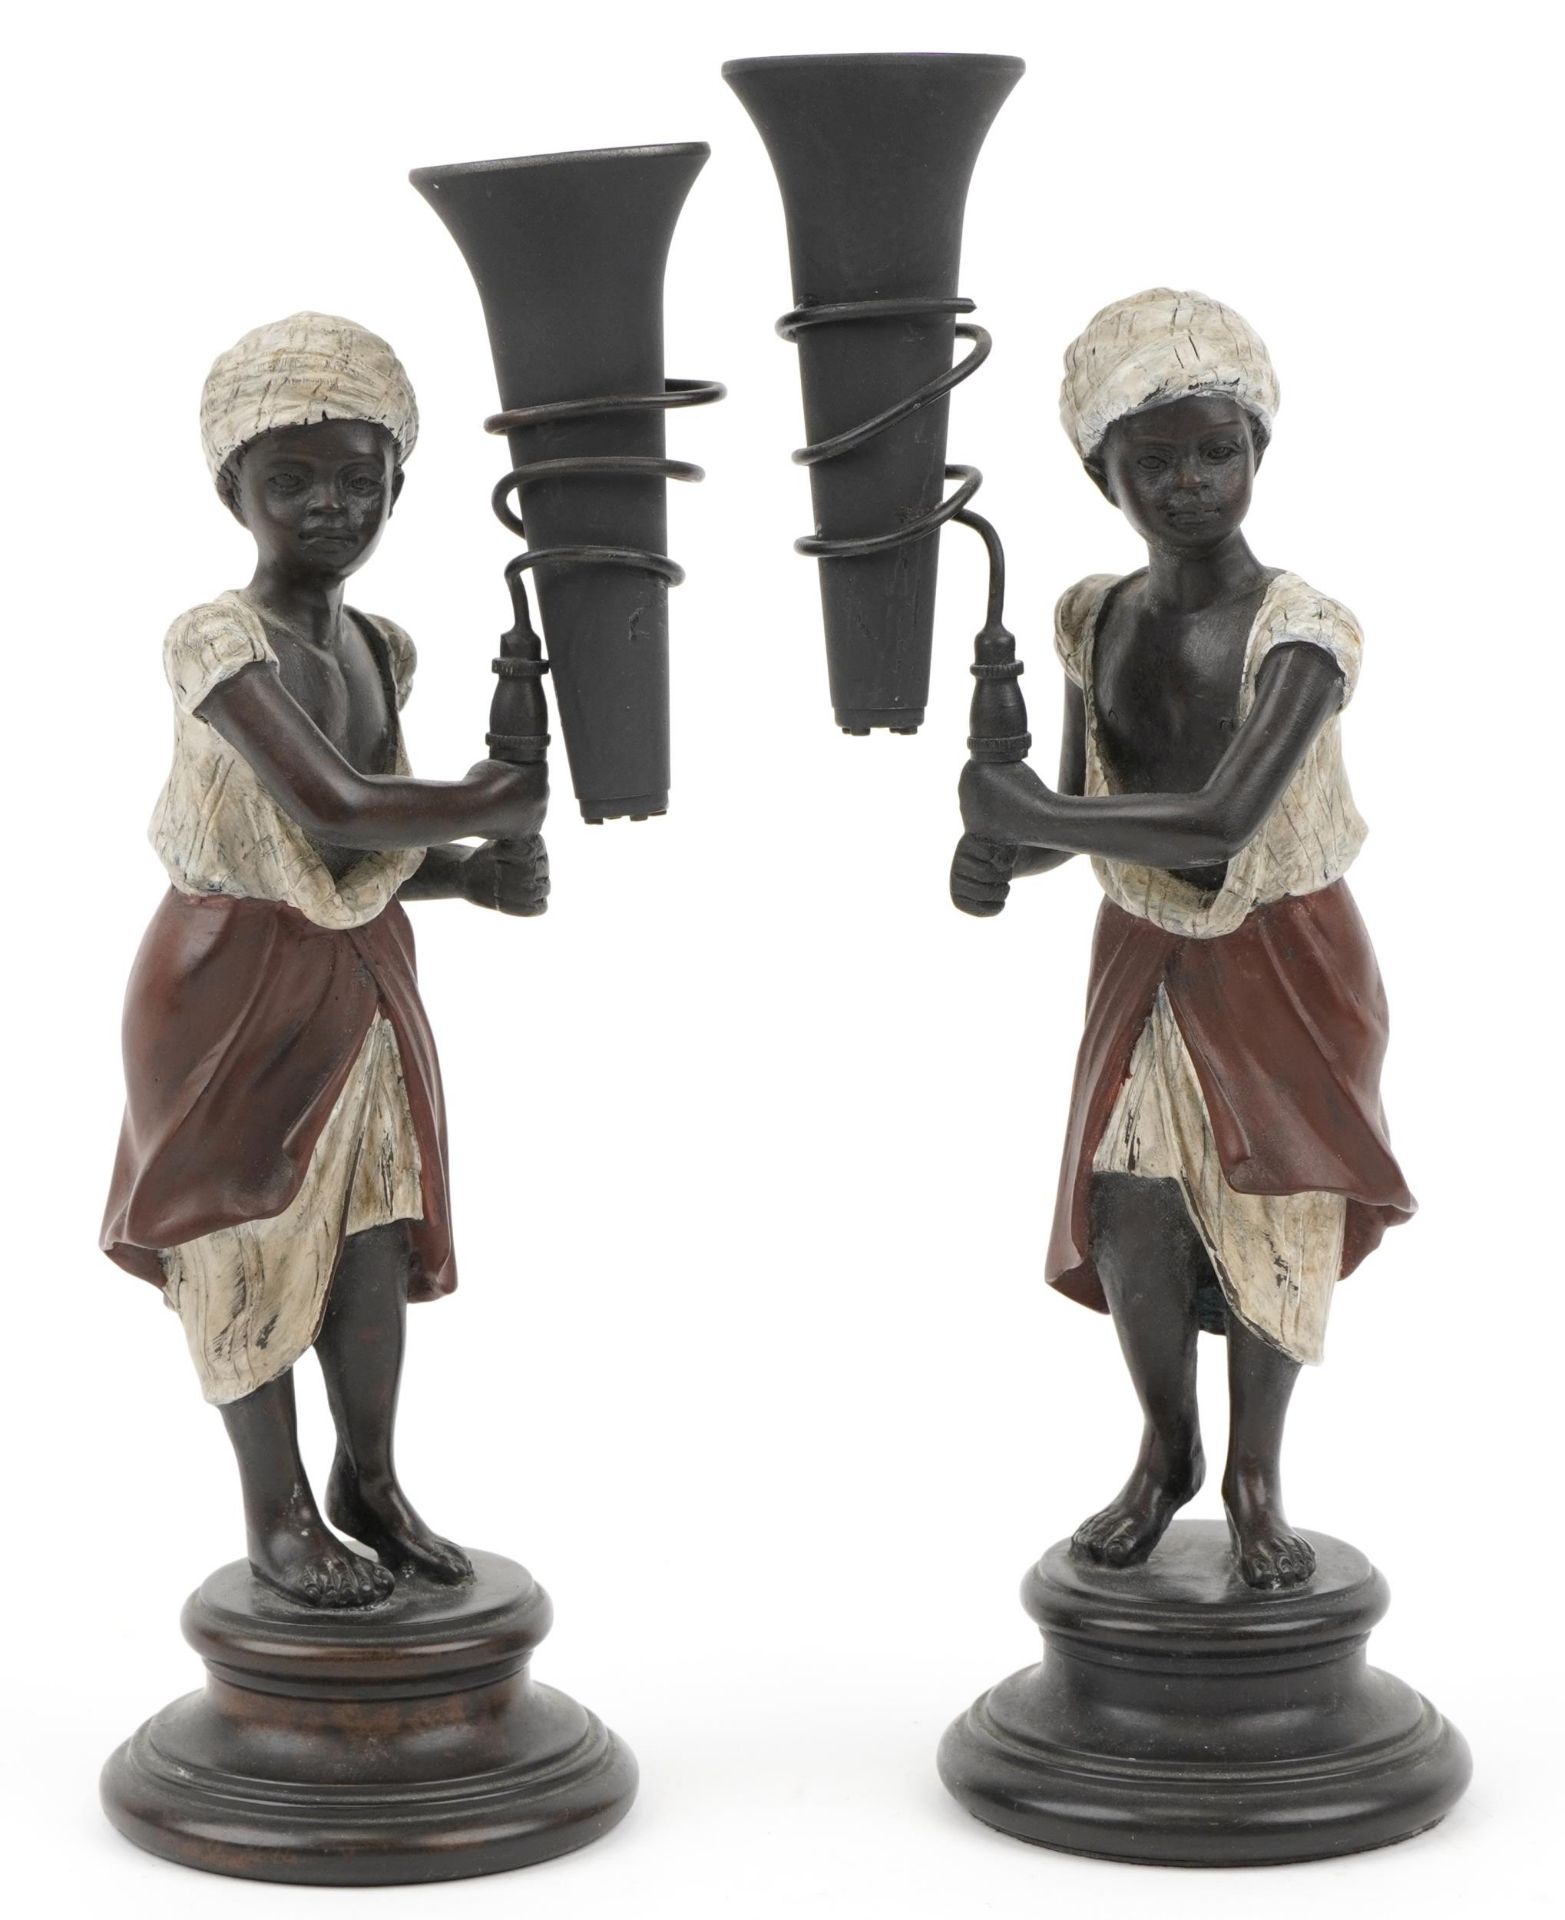 Pair of Regency style cold painted bronze Blackamoor design vases, each 29cm high : For further